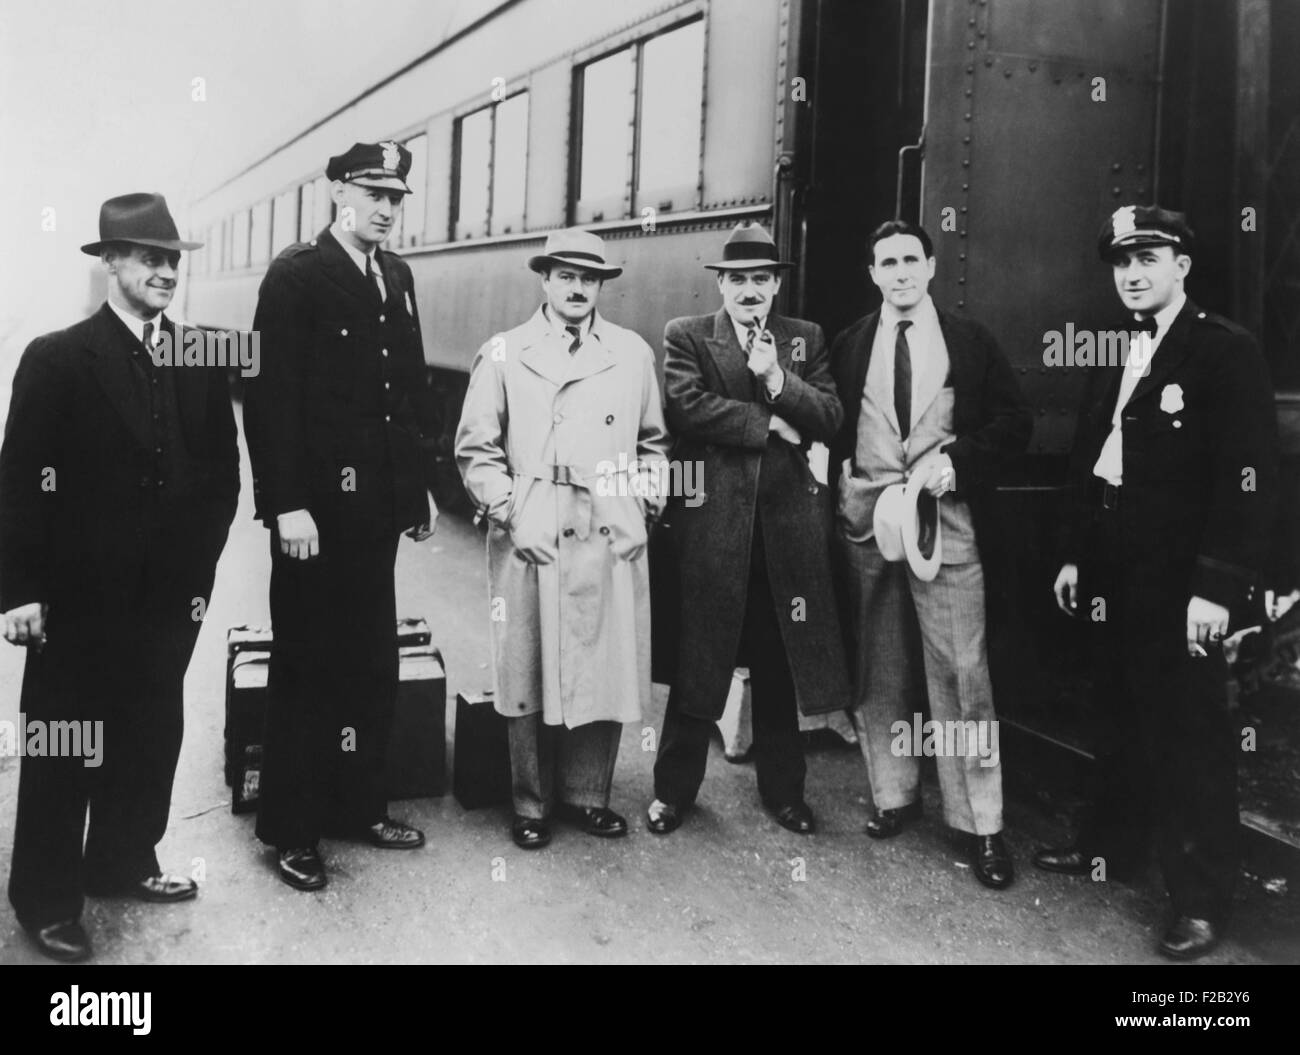 Earl Browder, Communist candidate for President, was arrested as he arrived in Terre Haute, Indiana. Sept. 30, 1936. Browder and four companions were held on vagrancy charges. L-R: H. A. Collins, Sec.Vigo County Law and Order League; unidentified policeman; Waldo Frank, New York novelist; Earl Browder; Seymour Waldman, of New York; unidentified policeman. (CSU_2015_8_468) Stock Photo